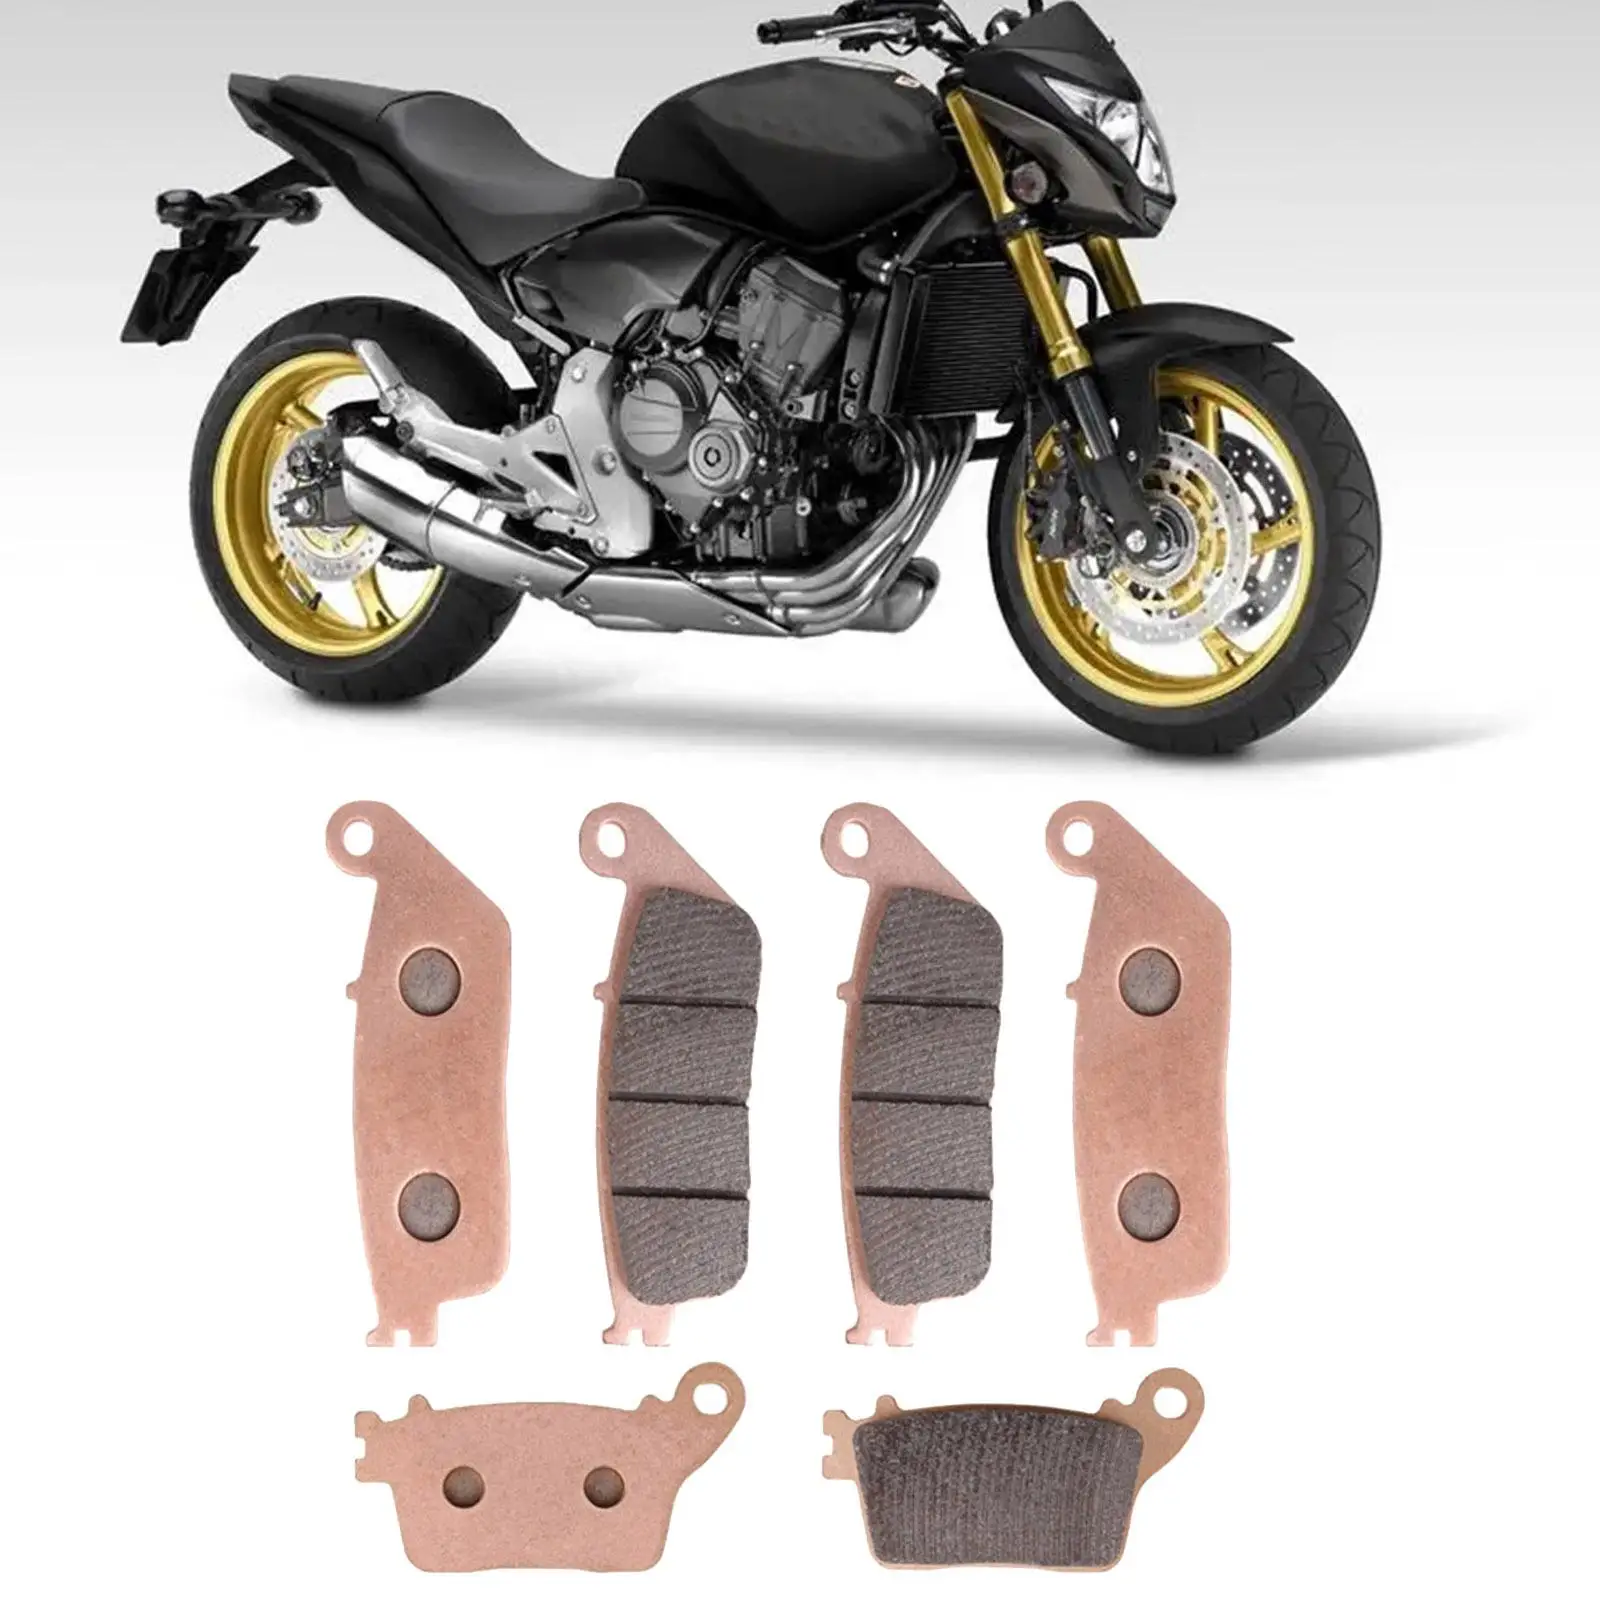 6 Pieces Front and Rear Brake Pads Motorcycle Replacement Part for Honda CB600 F7 F8 F9 Fa FB FC Hornet CBR600 FB FC Sturdy